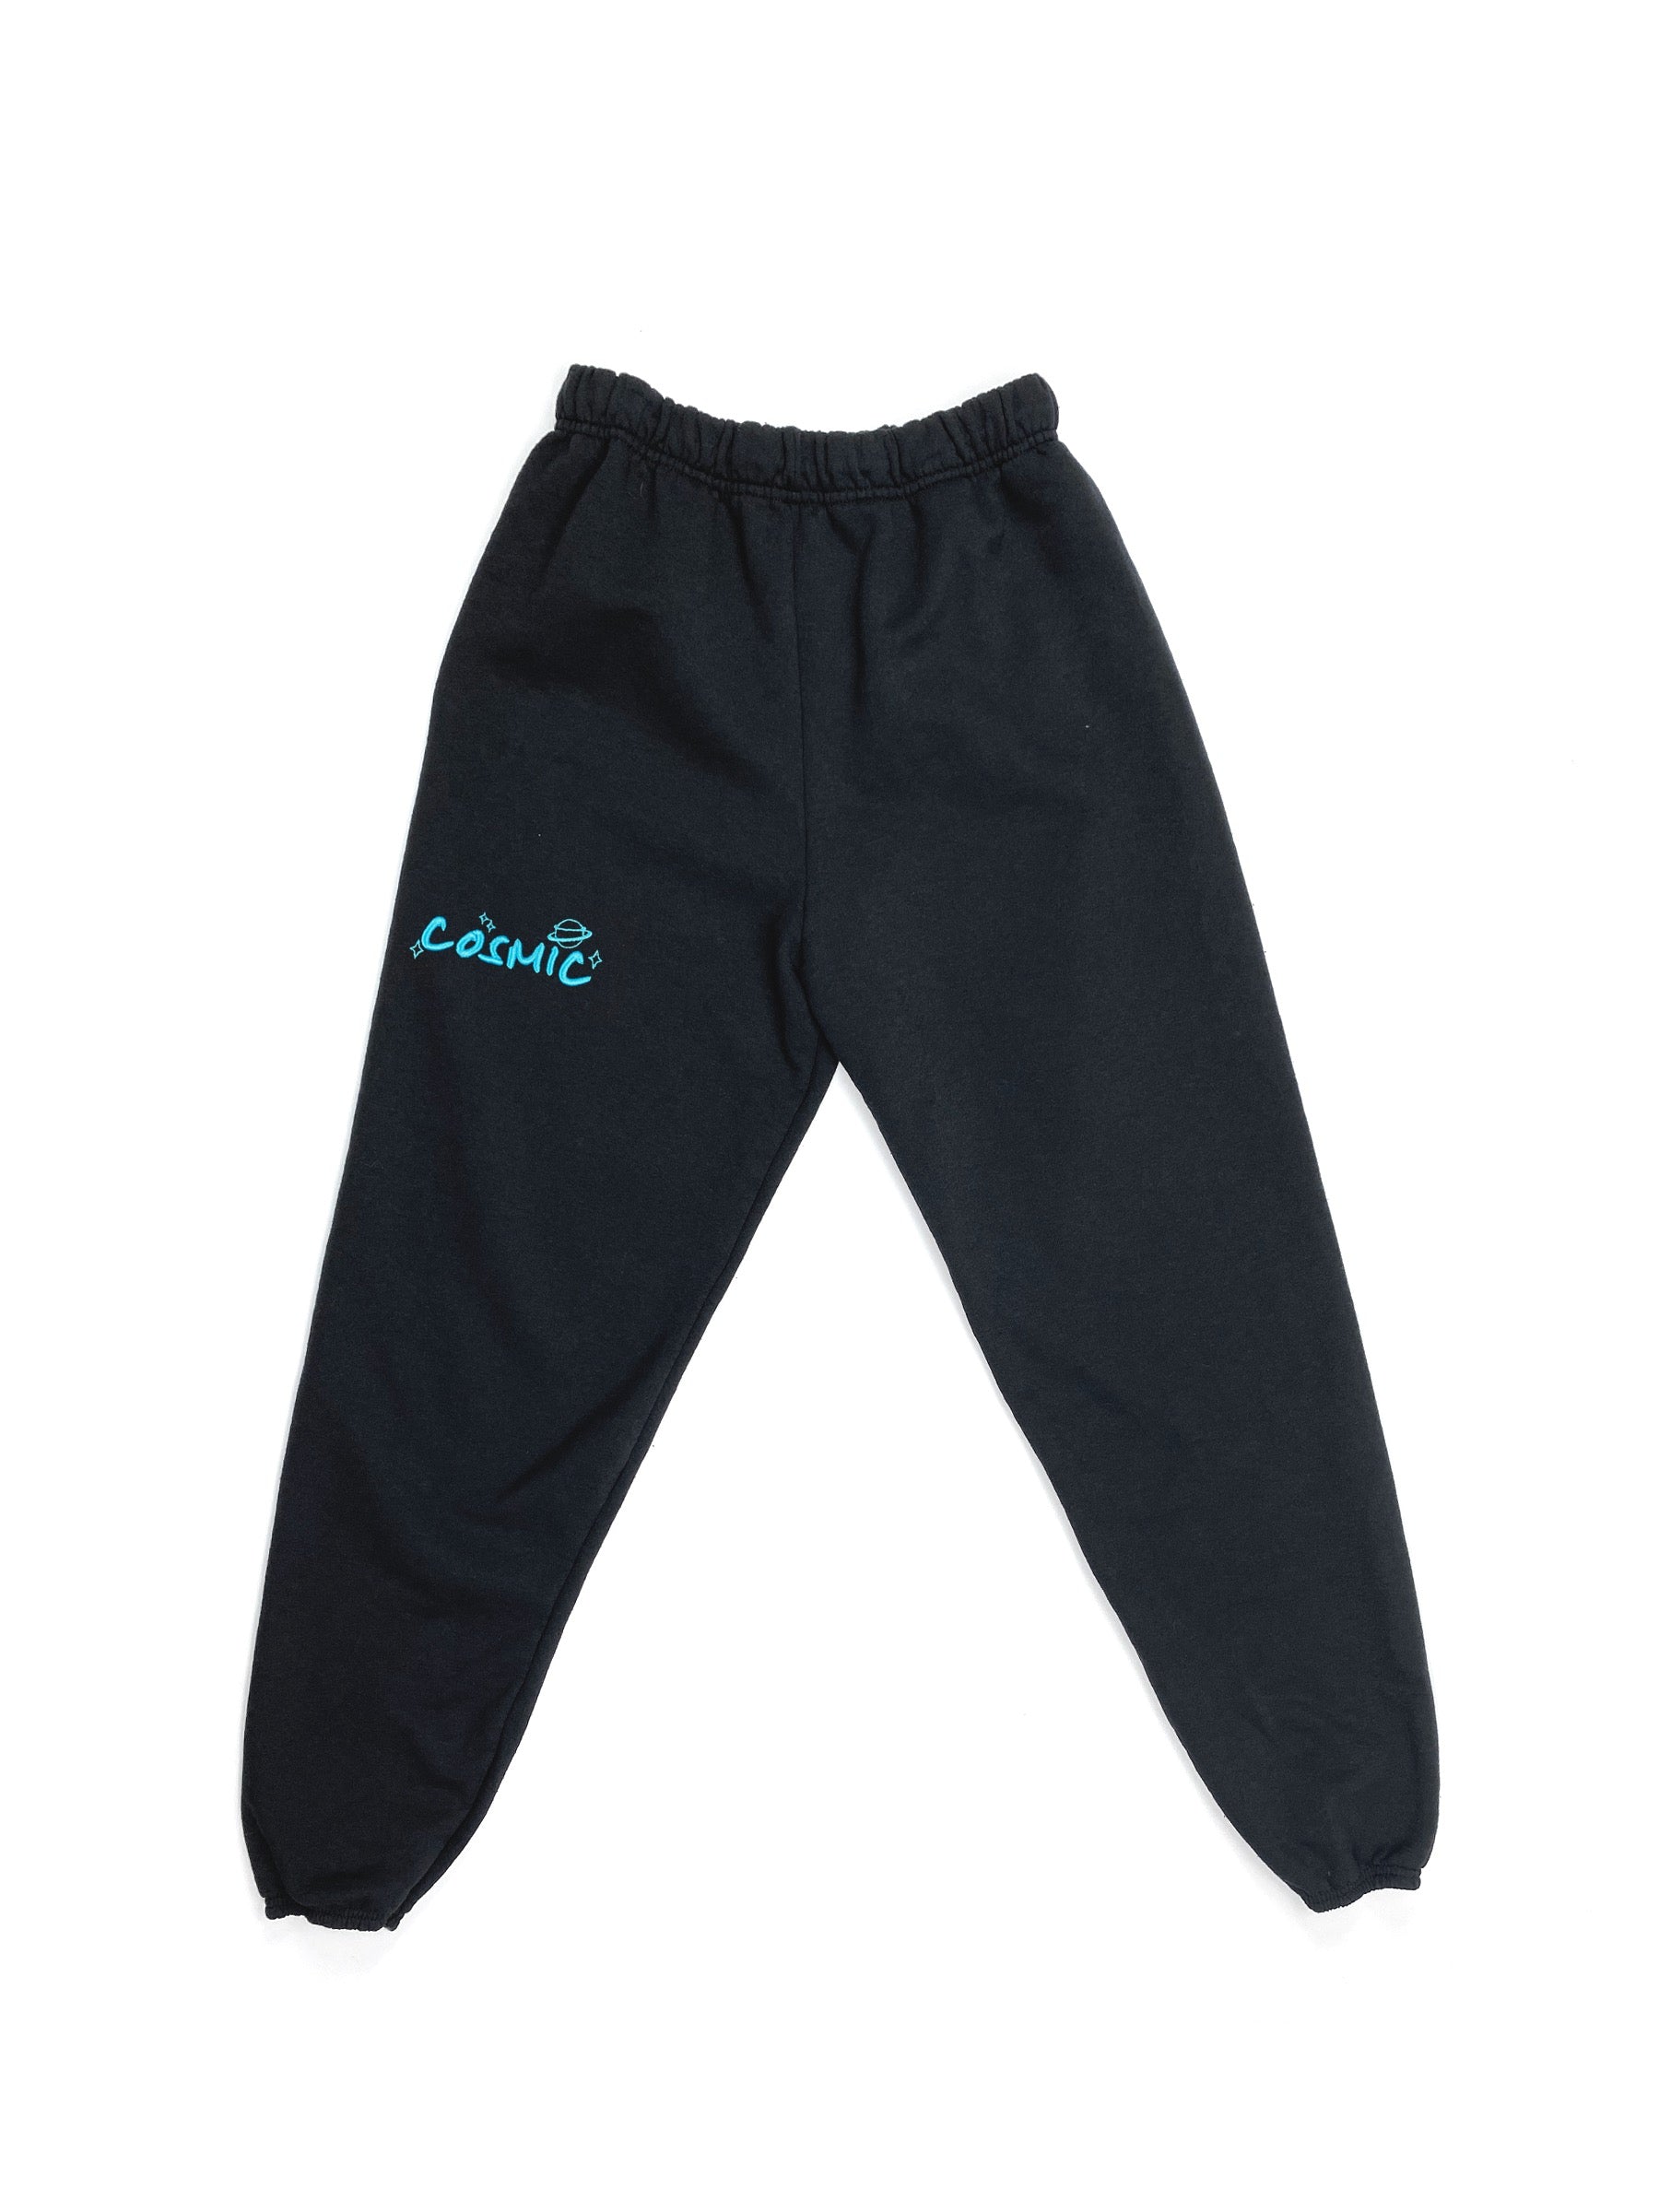 COSMIC EMBROIDERED BLACK SWEAT PANT